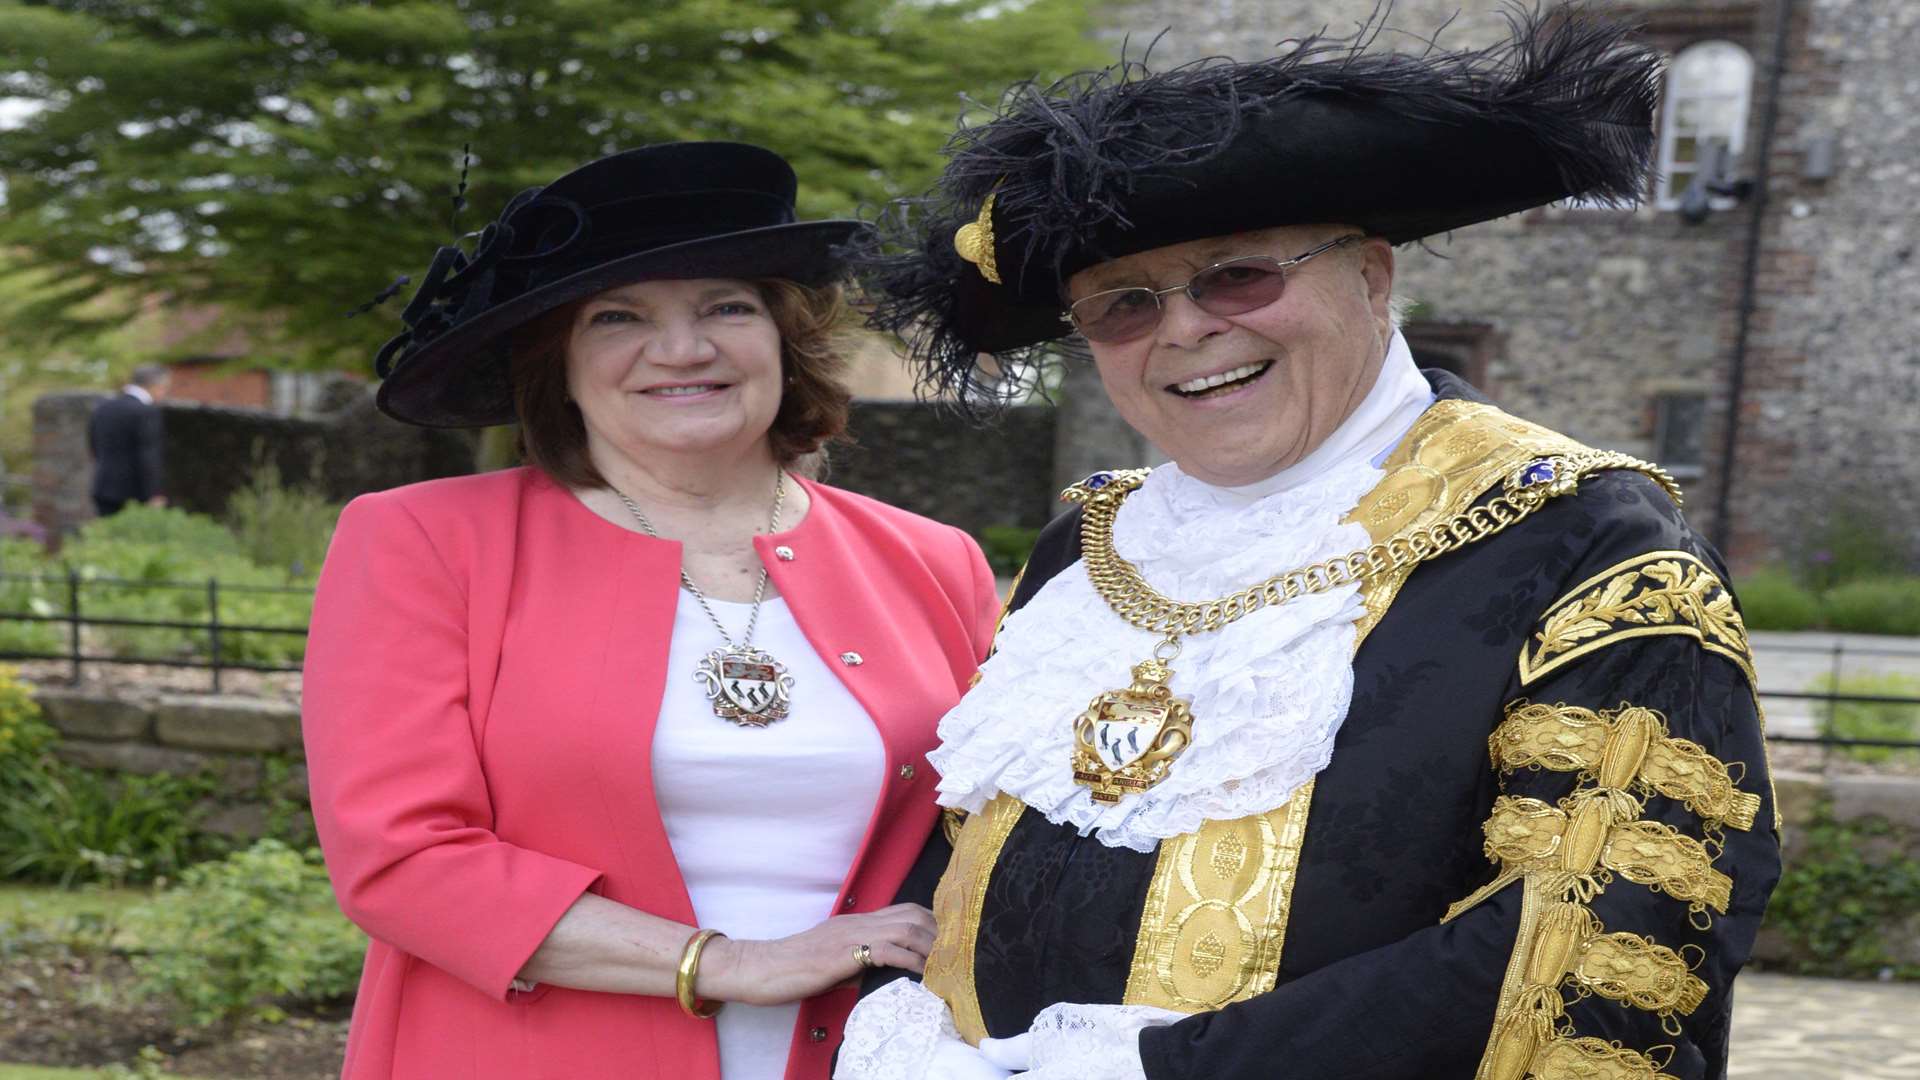 Outgoing Lord Mayor of Canterbury Cllr George Metcalfe with his wife Lillian.